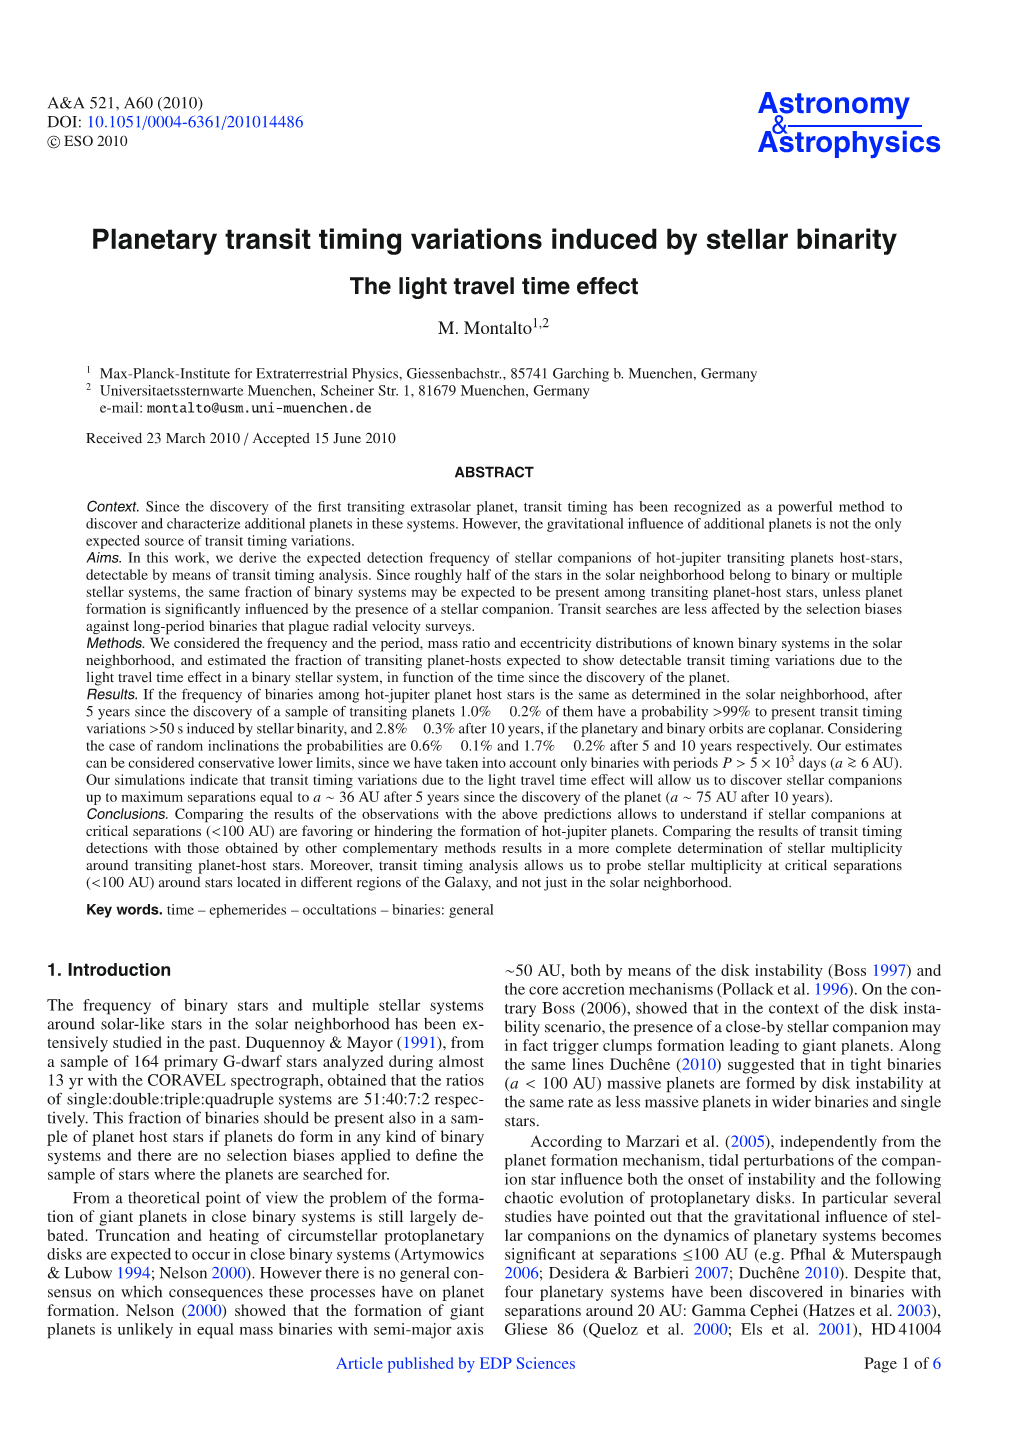 Planetary Transit Timing Variations Induced by Stellar Binarity the Light Travel Time Effect